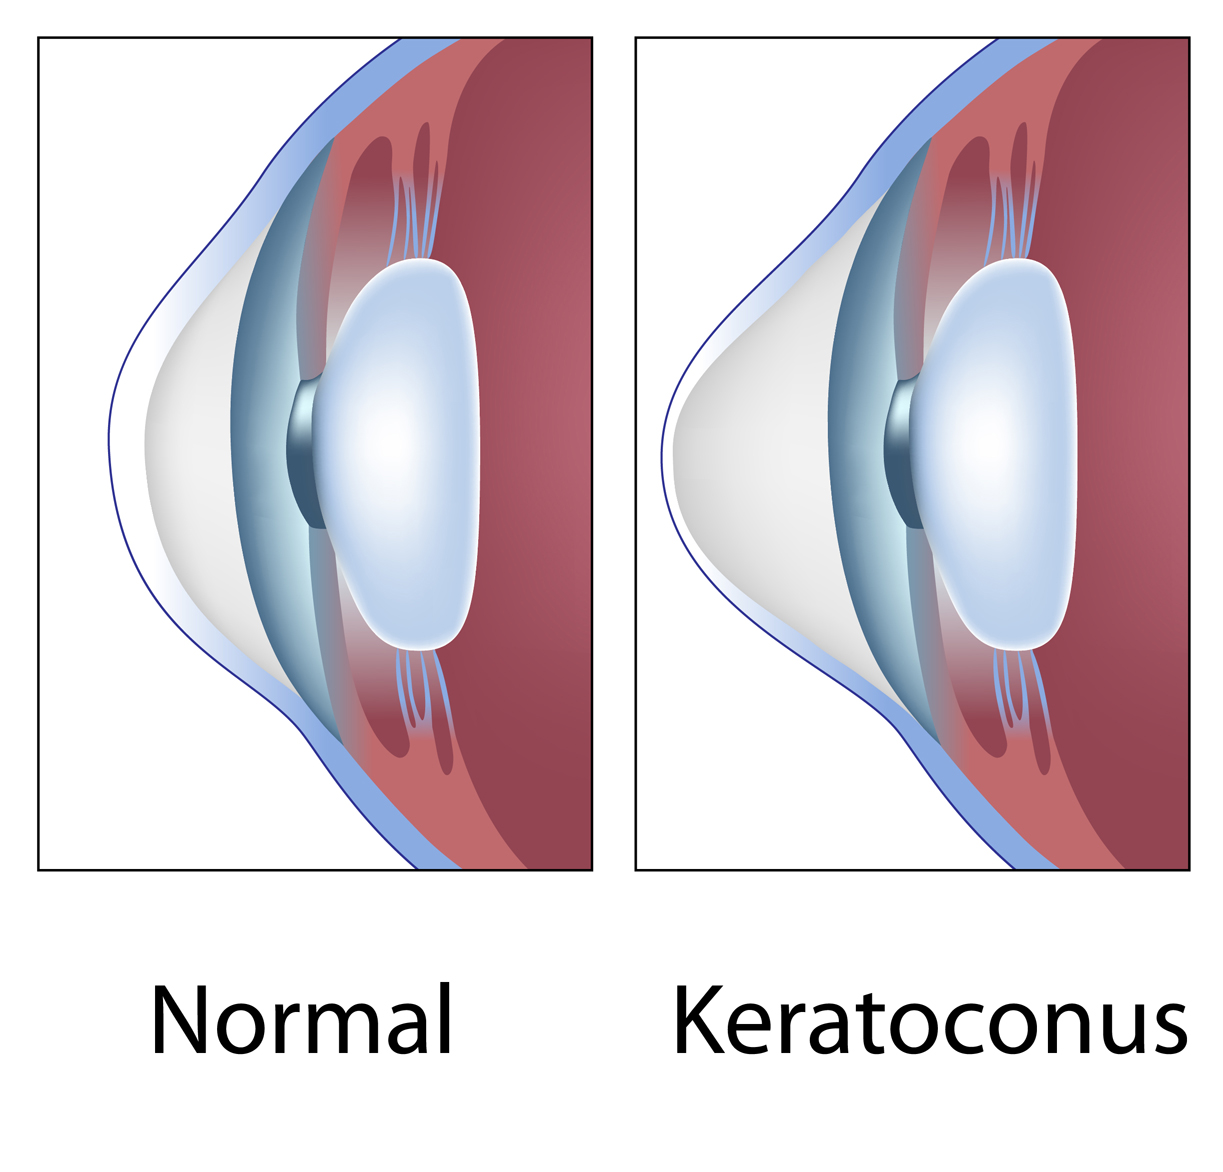 The shape of the cornea in a patient with keratoconus, corneal cross-linking